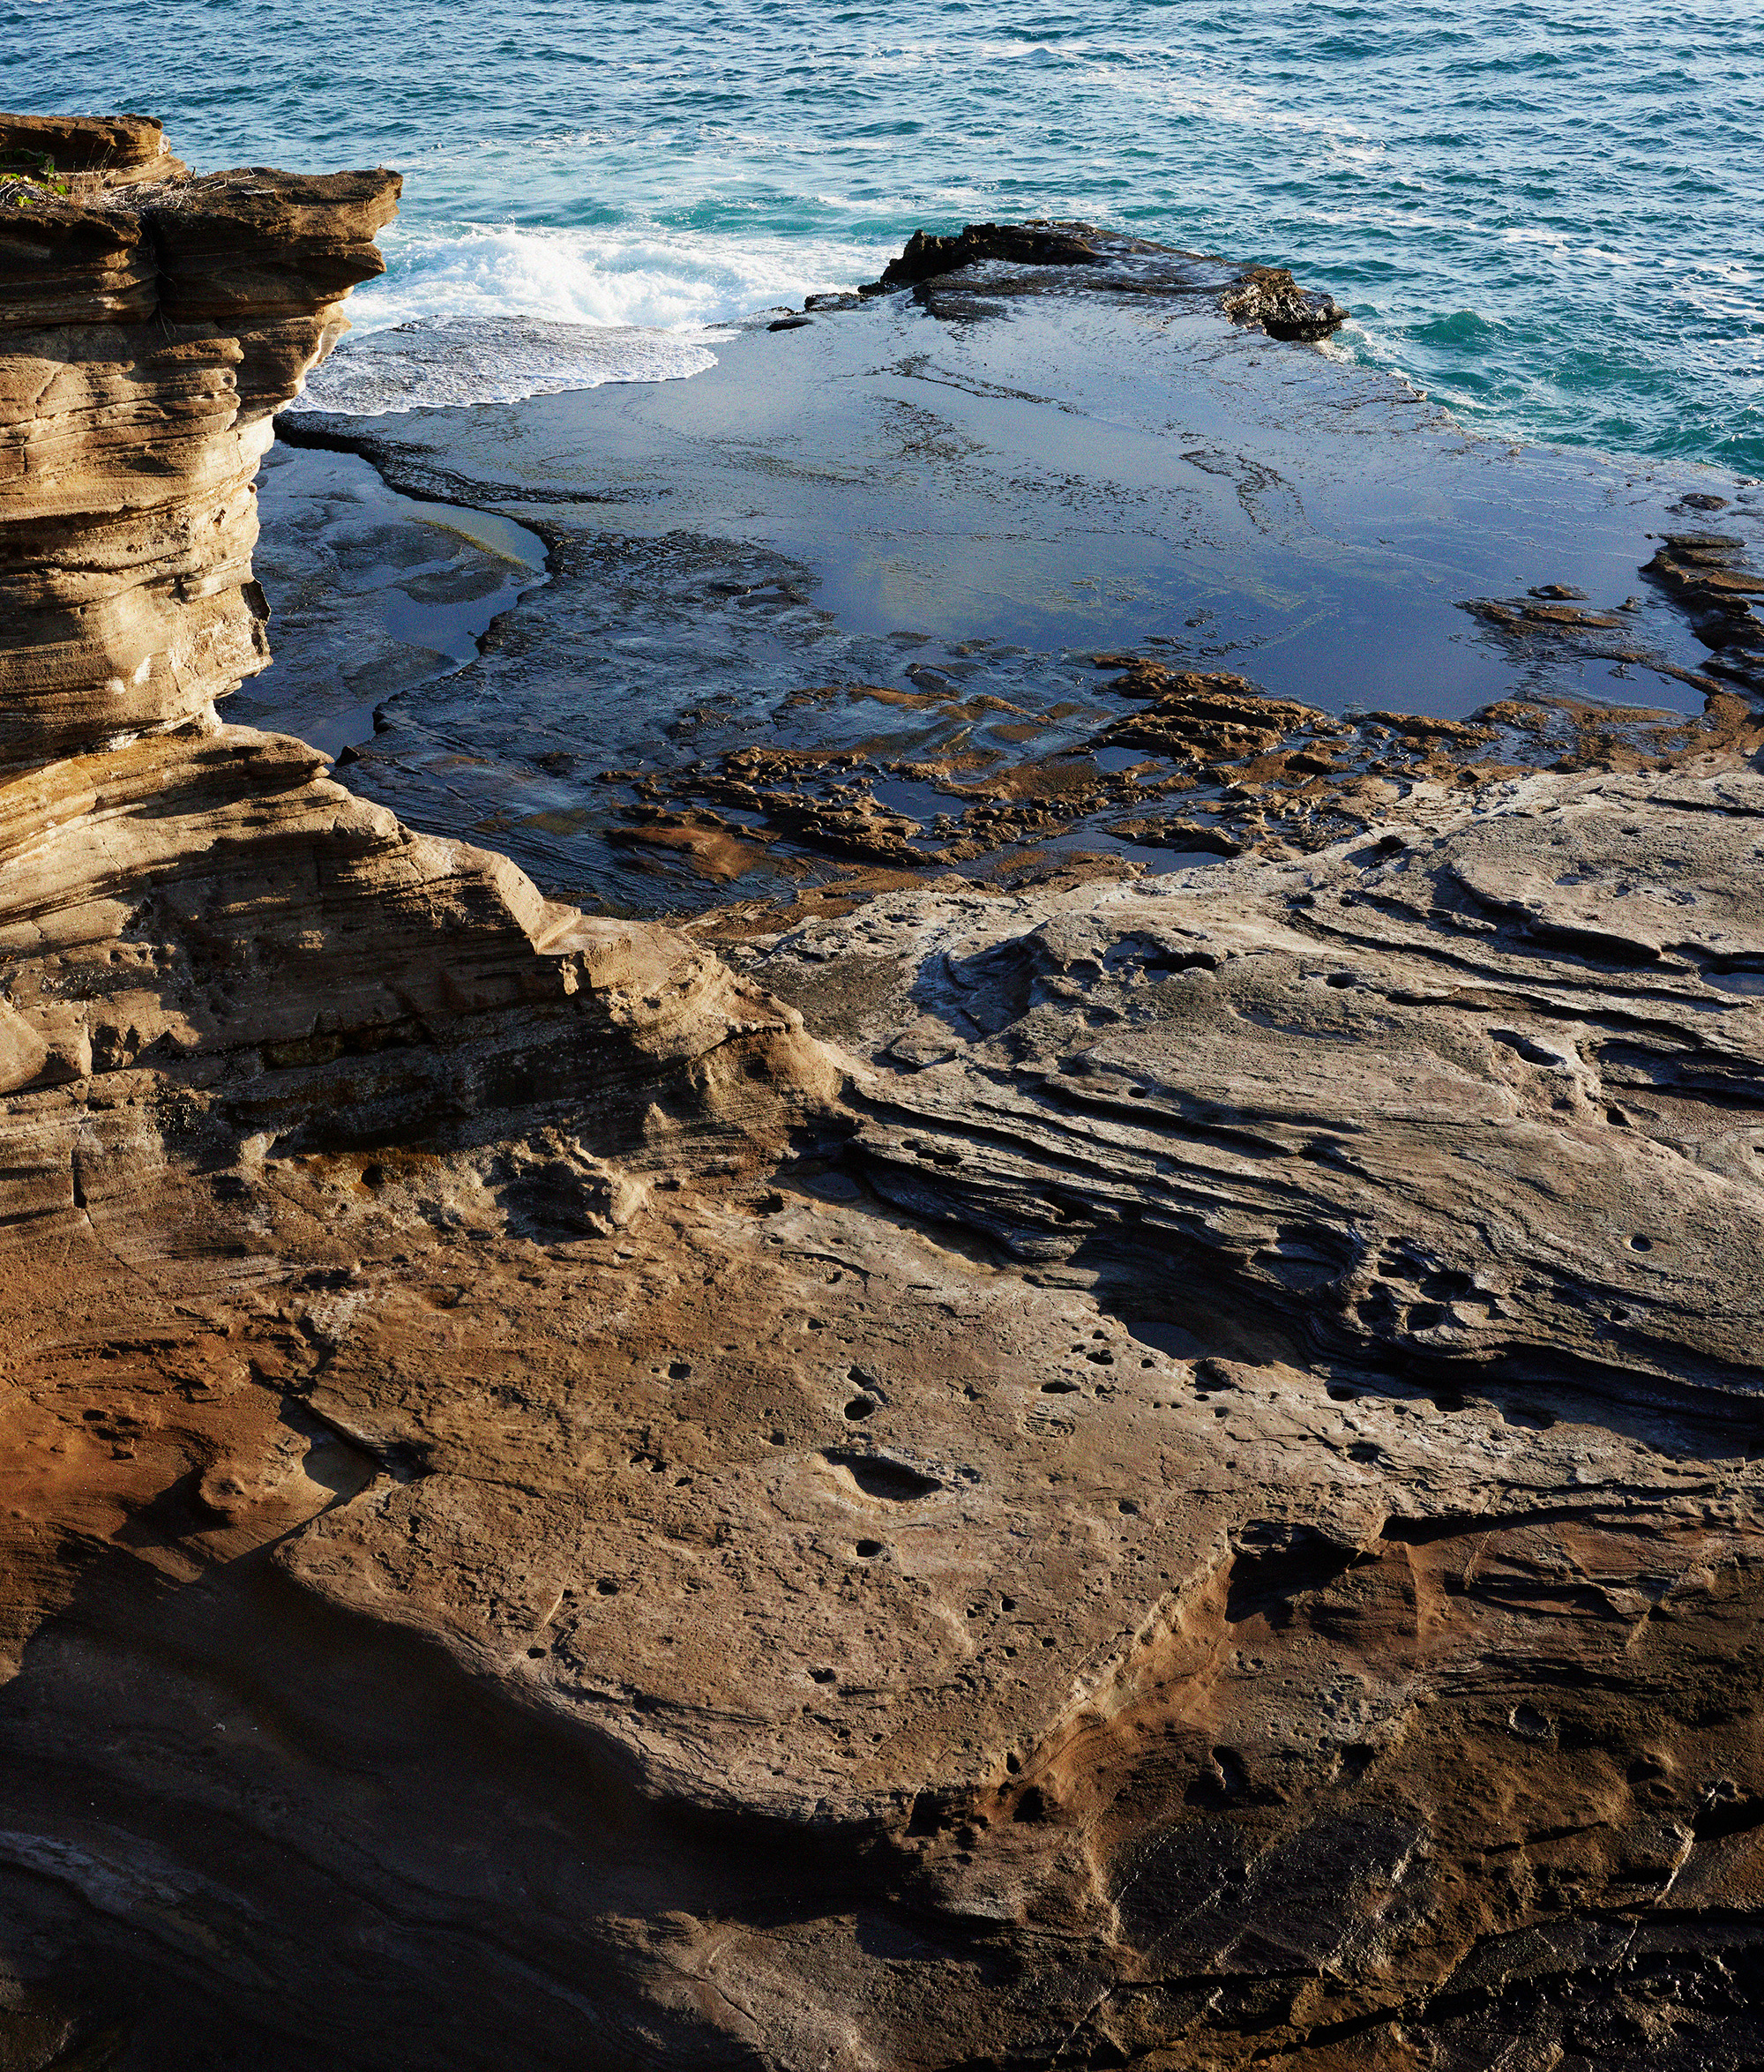 Ocean rock formations and waves